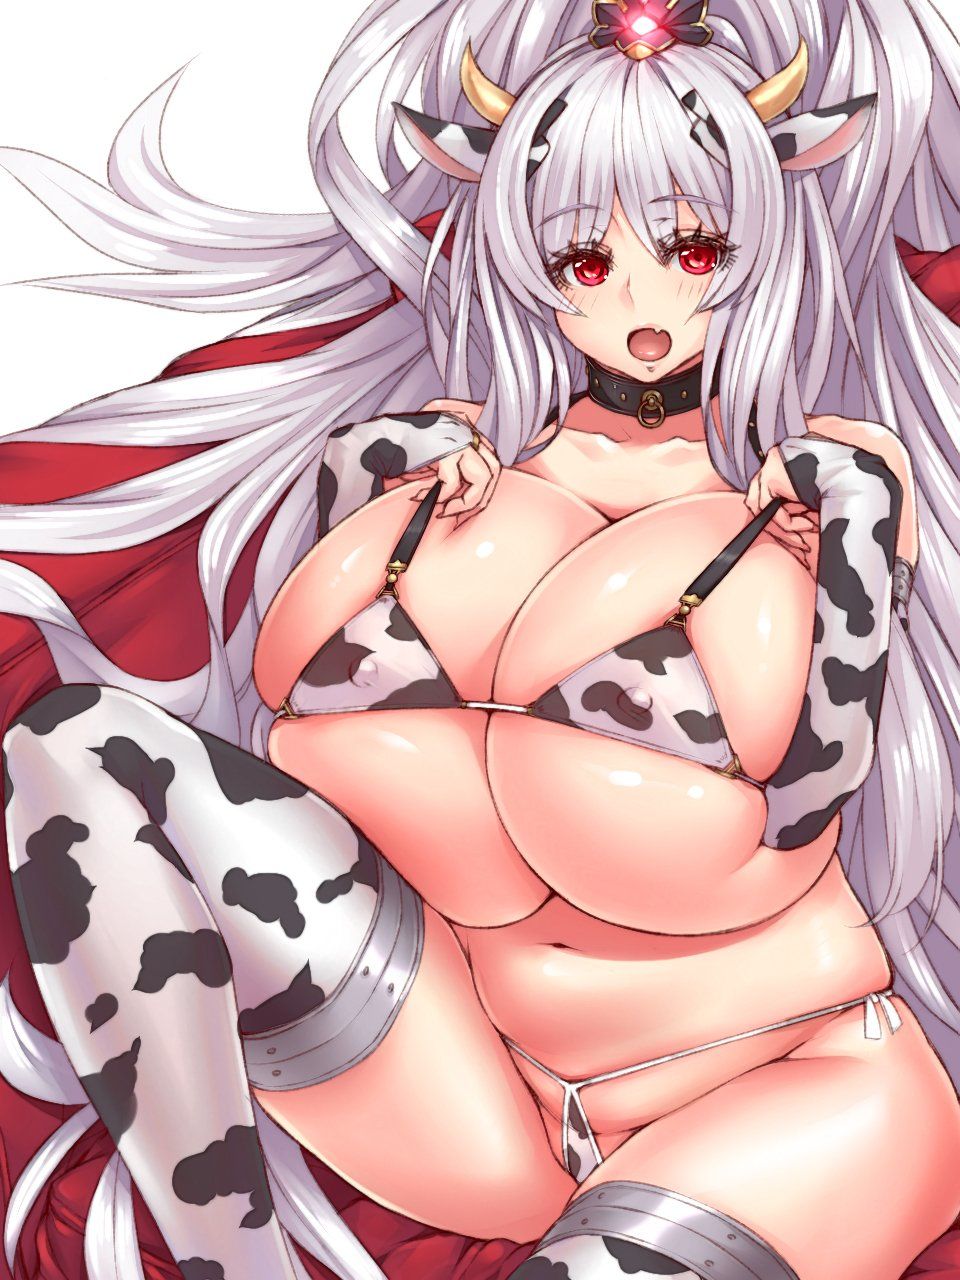 【Secondary】Erotic image of Holstein big girl with cow pattern underwear after this year's Chinese zodiac year 62